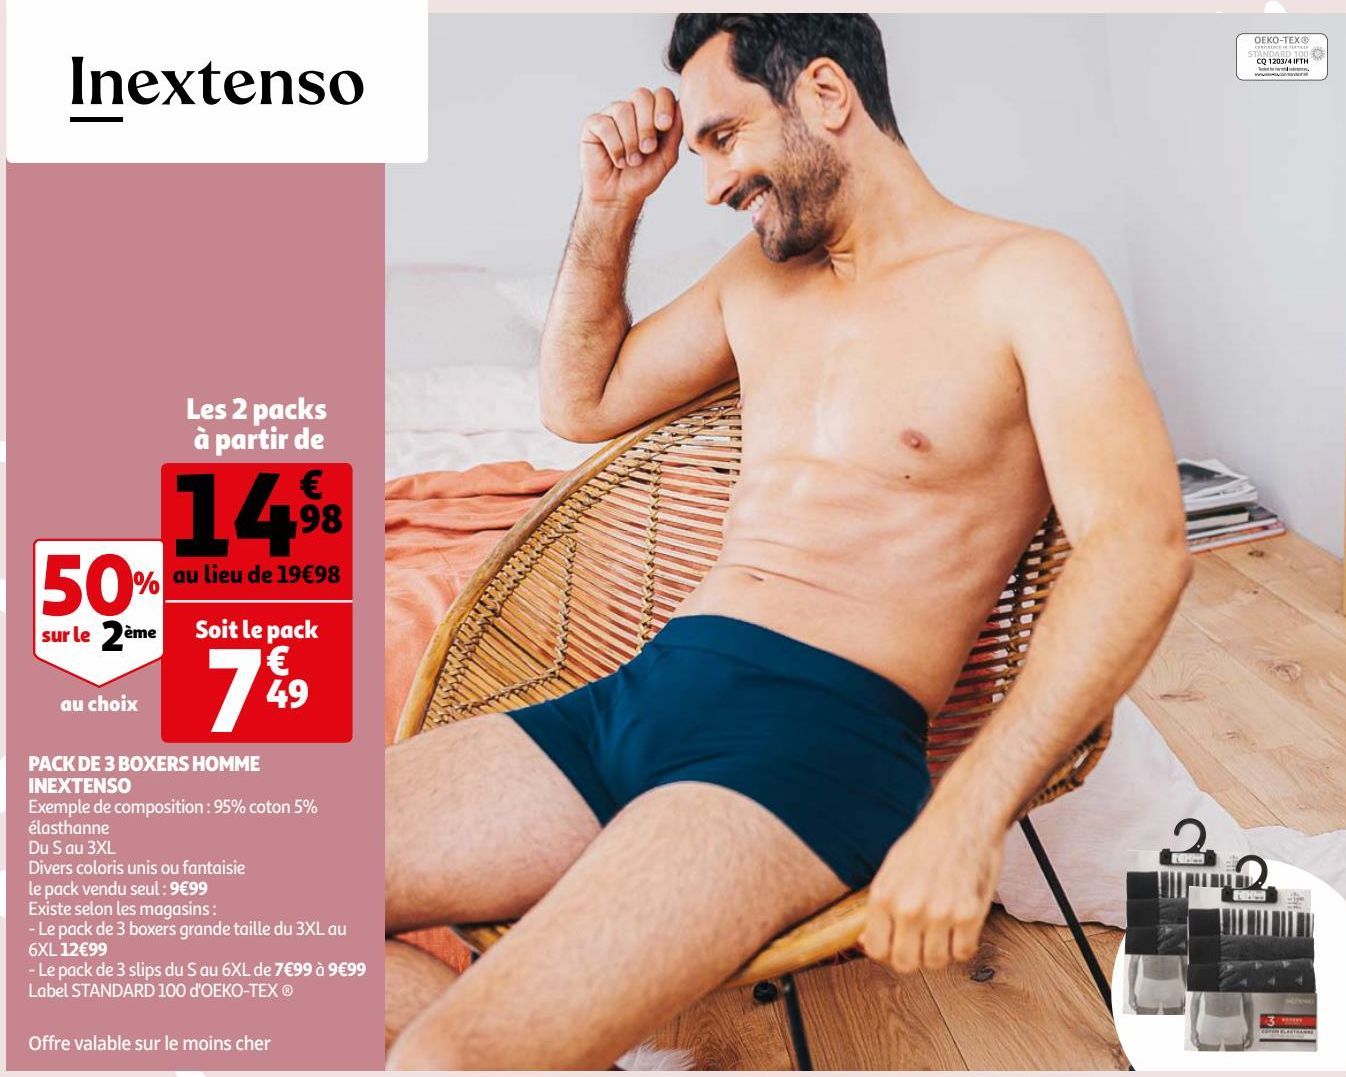 PACK DE 3 BOXERS HOMME INEXTENSO